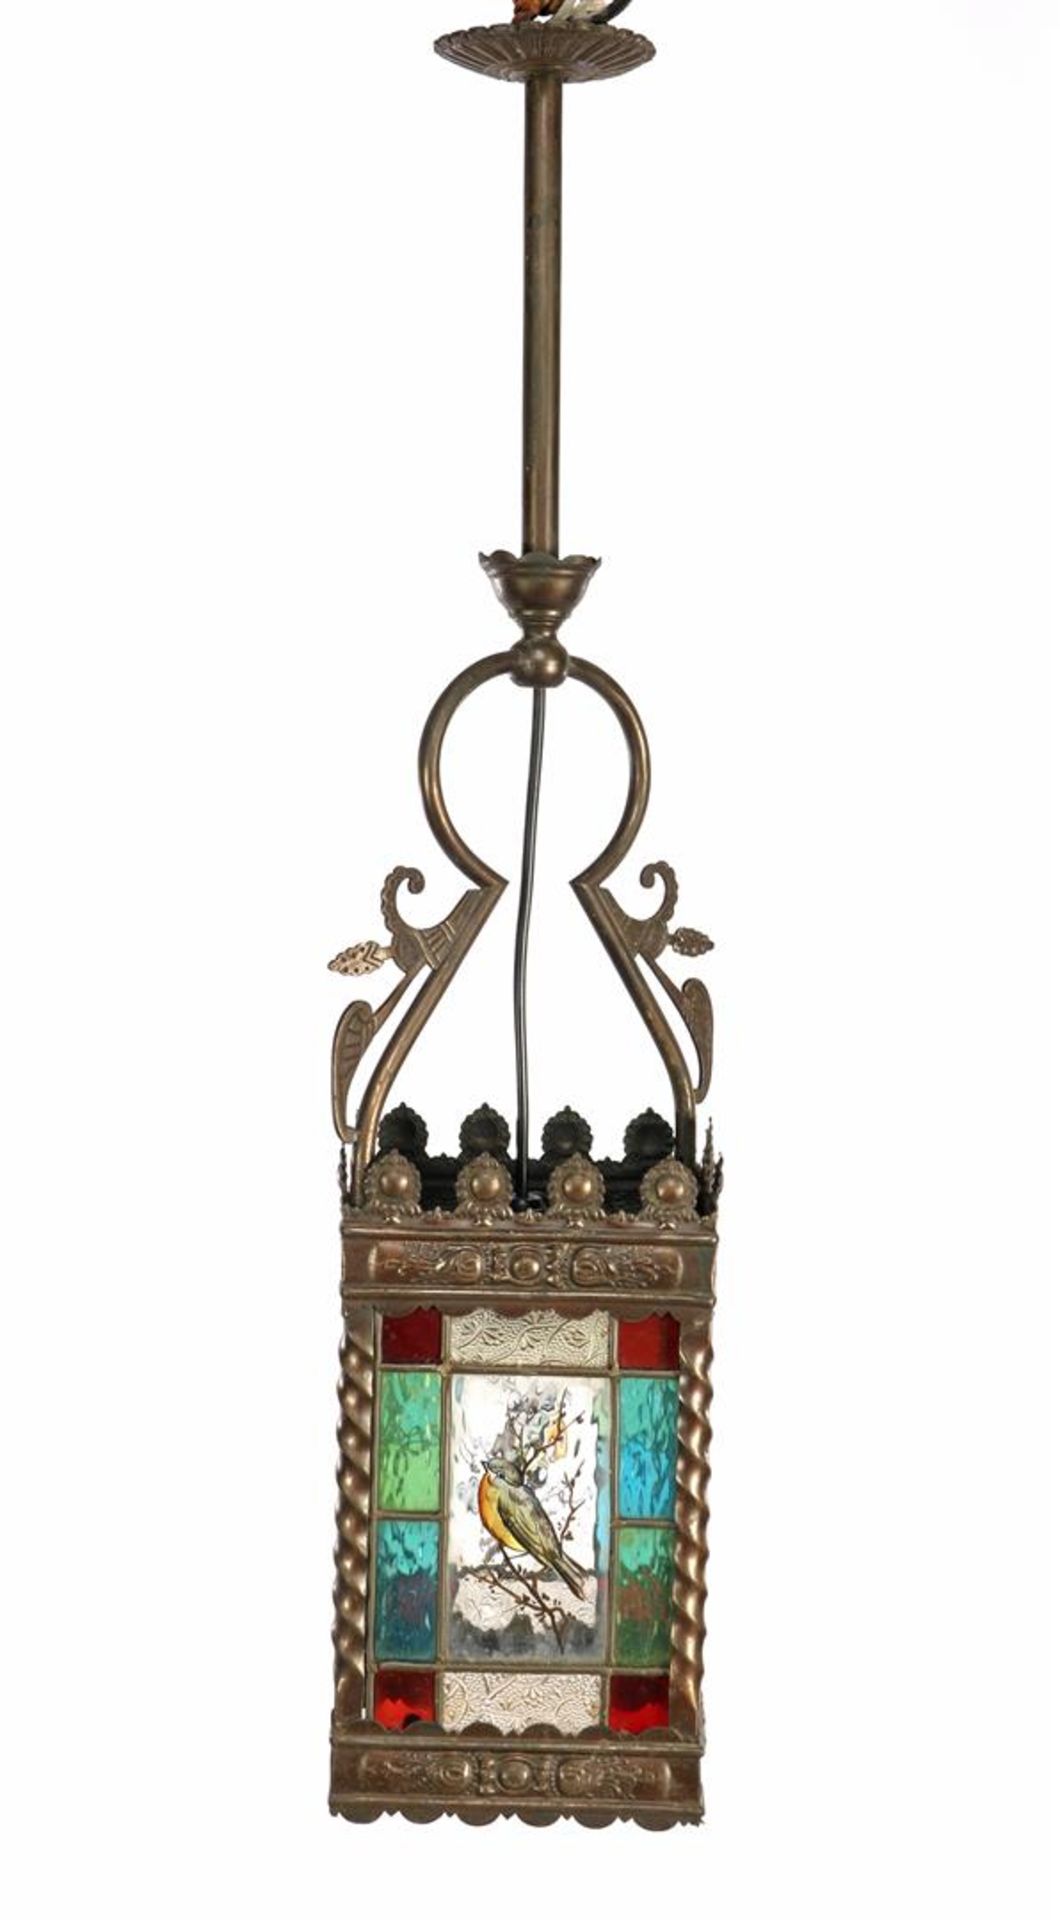 Stained glass hall lamp with colored glass